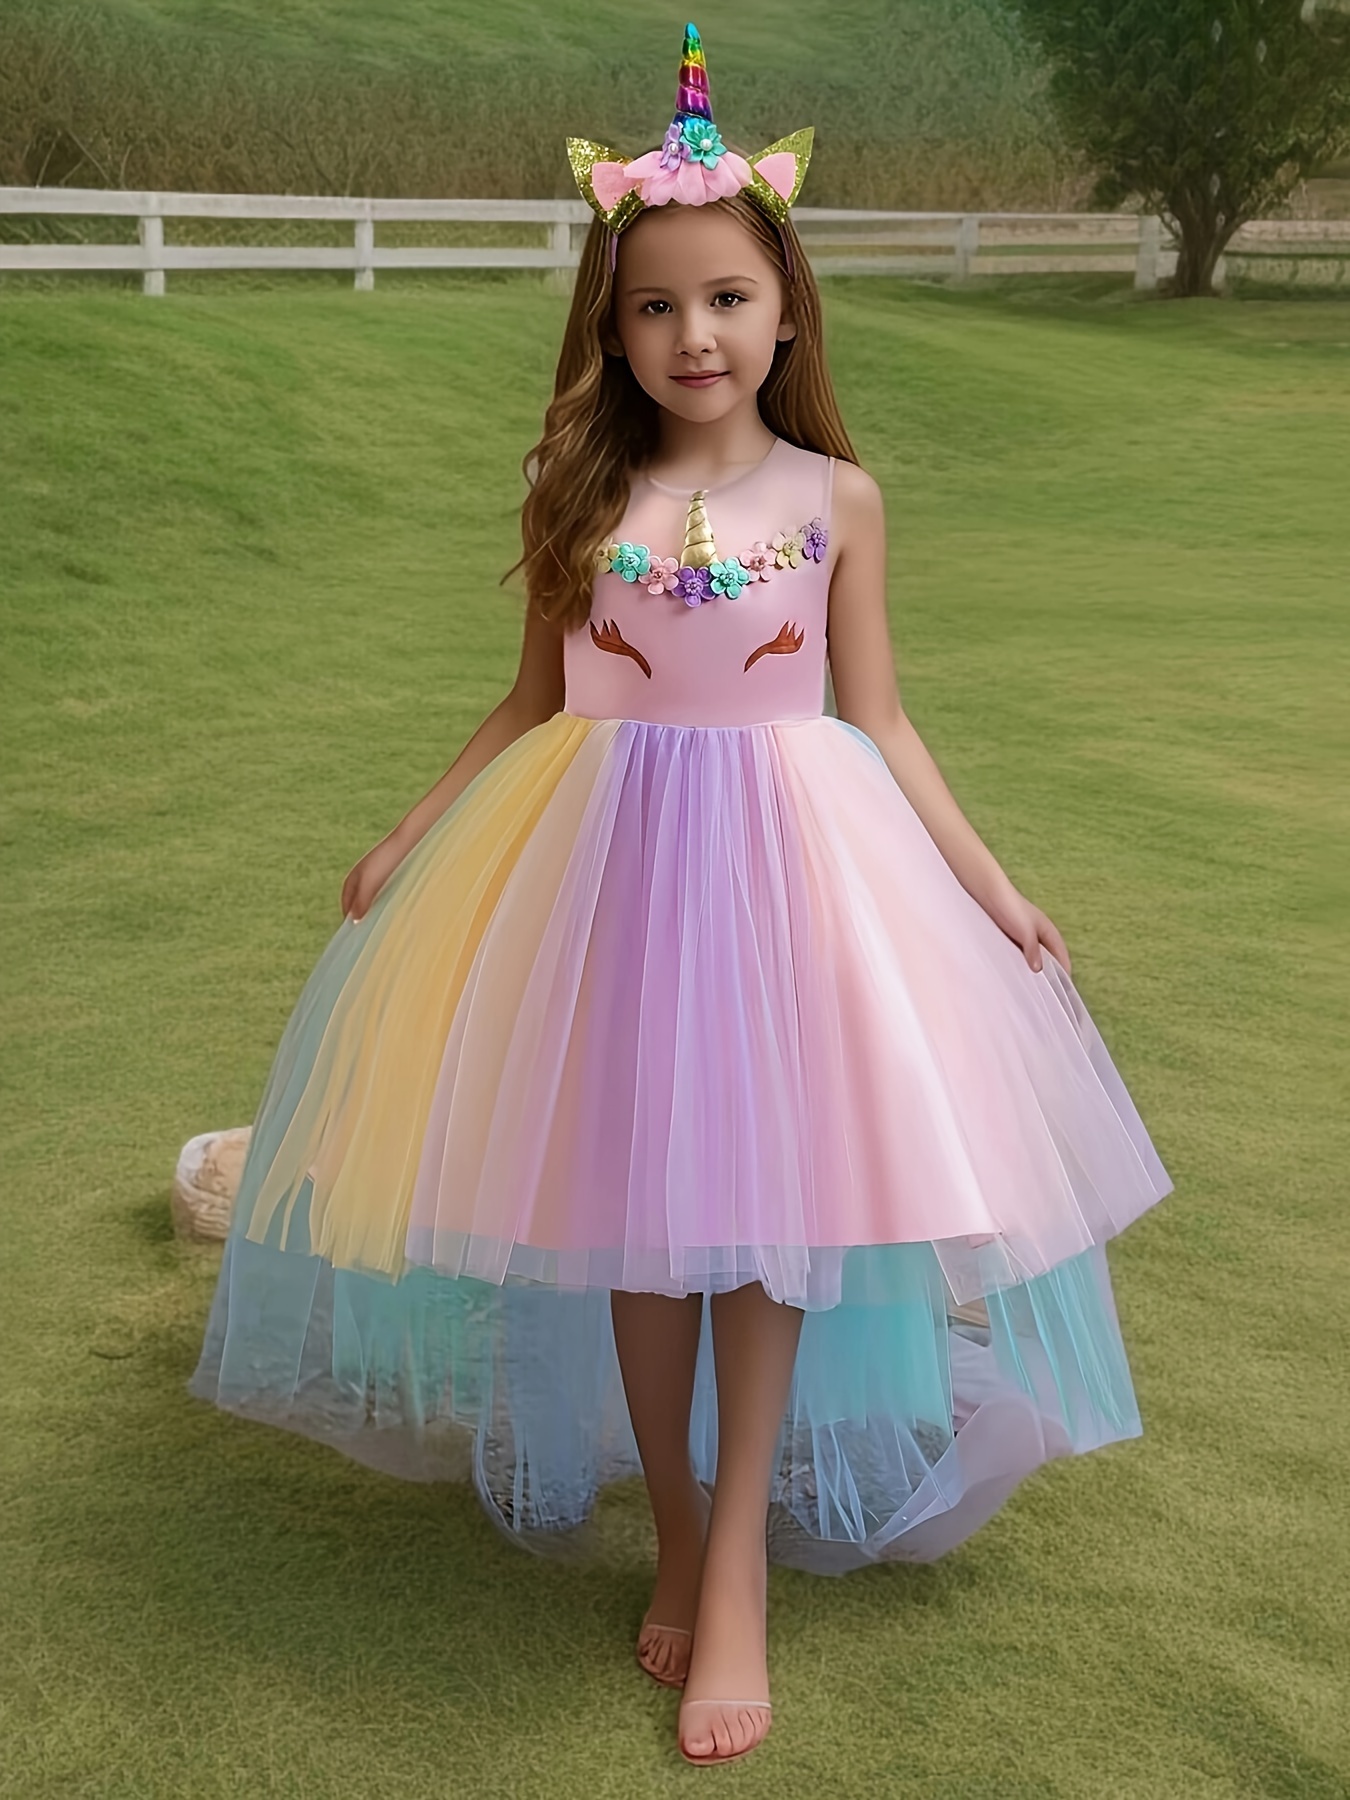 Girls Unicorn Dresses Summer Swing Short Sleeve Casual Clothes for